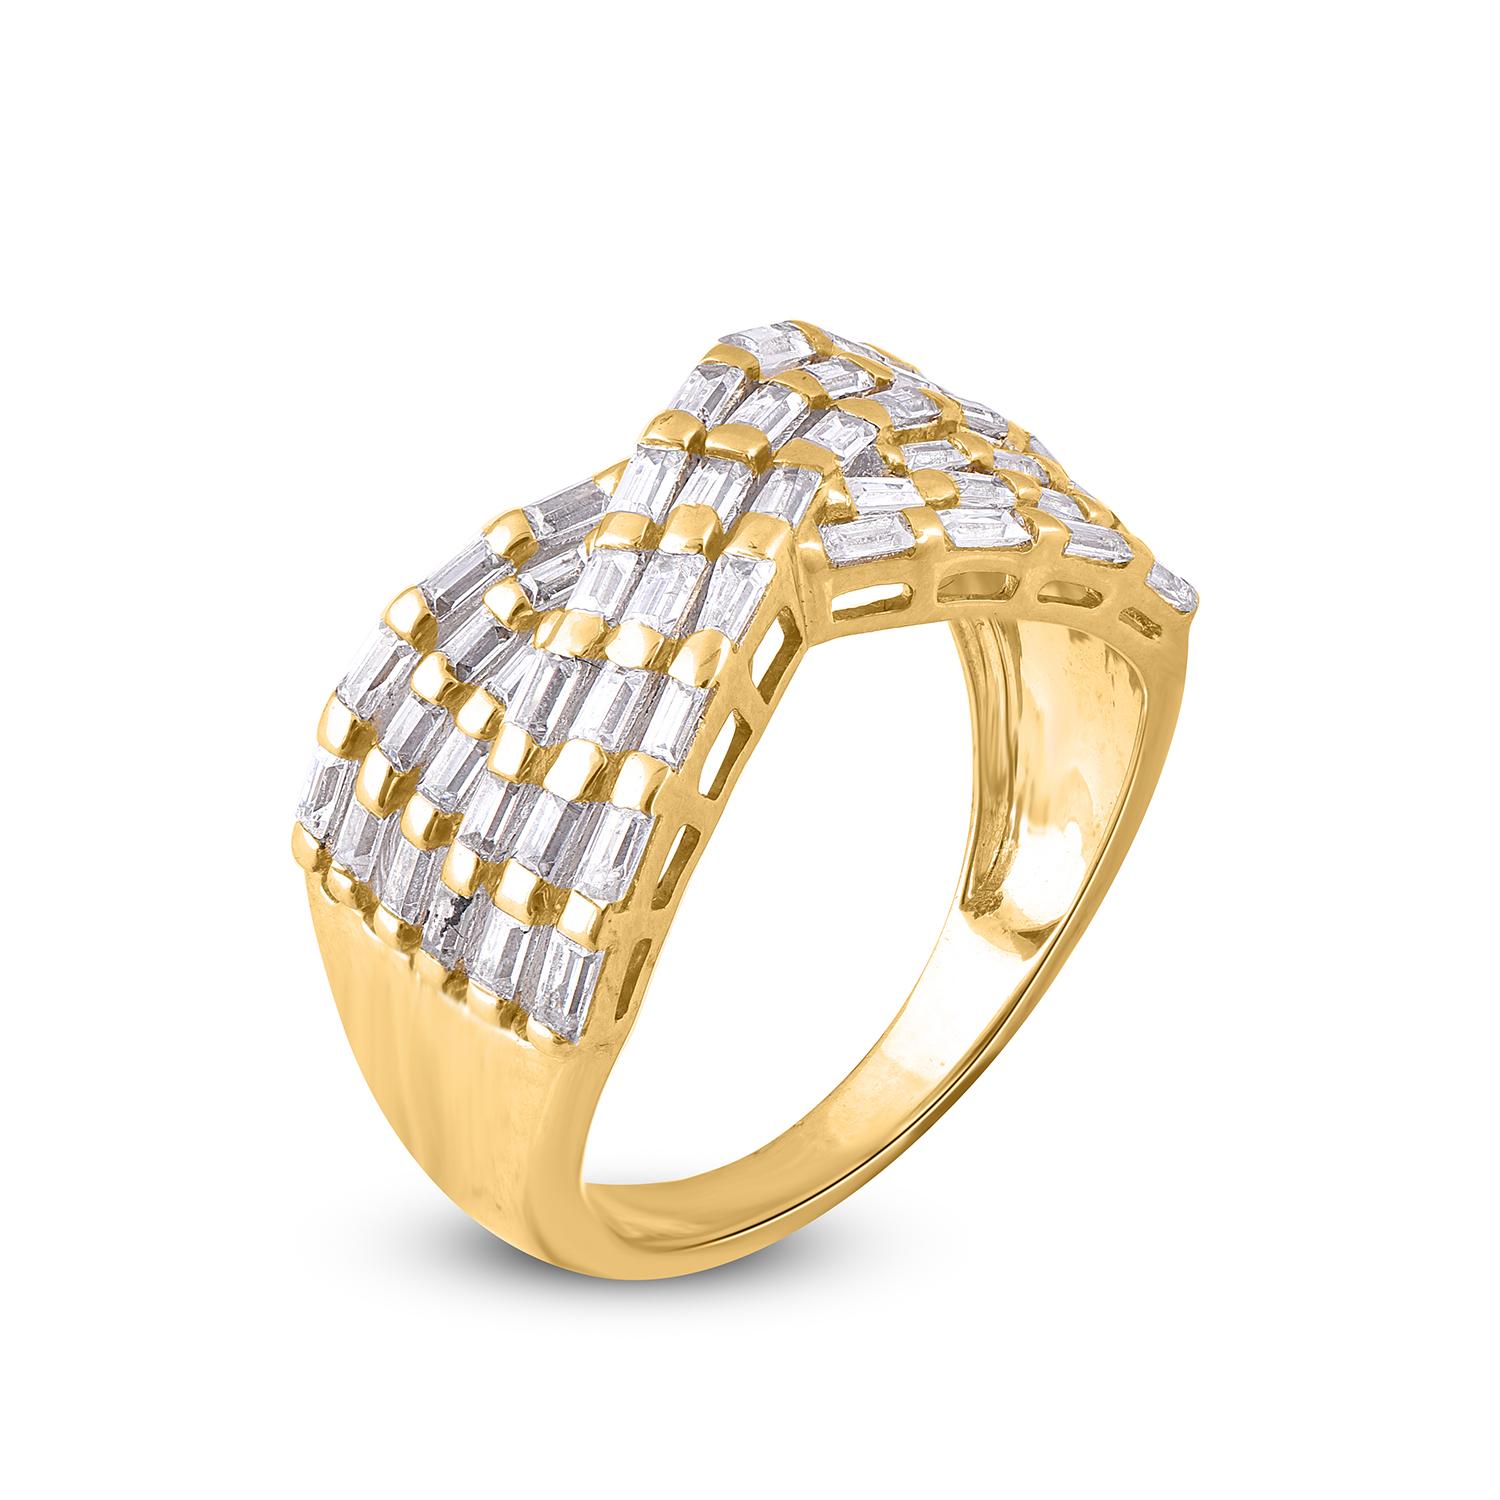 Expertly Crafted of sparkling 14 Karat Yellow Gold with 1.00 carat diamond crisscross ring in high polish finish and set with 49 baguette cut diamond set in channel setting, We only use 100% natural and conflict free diamonds which sparkles in H-I